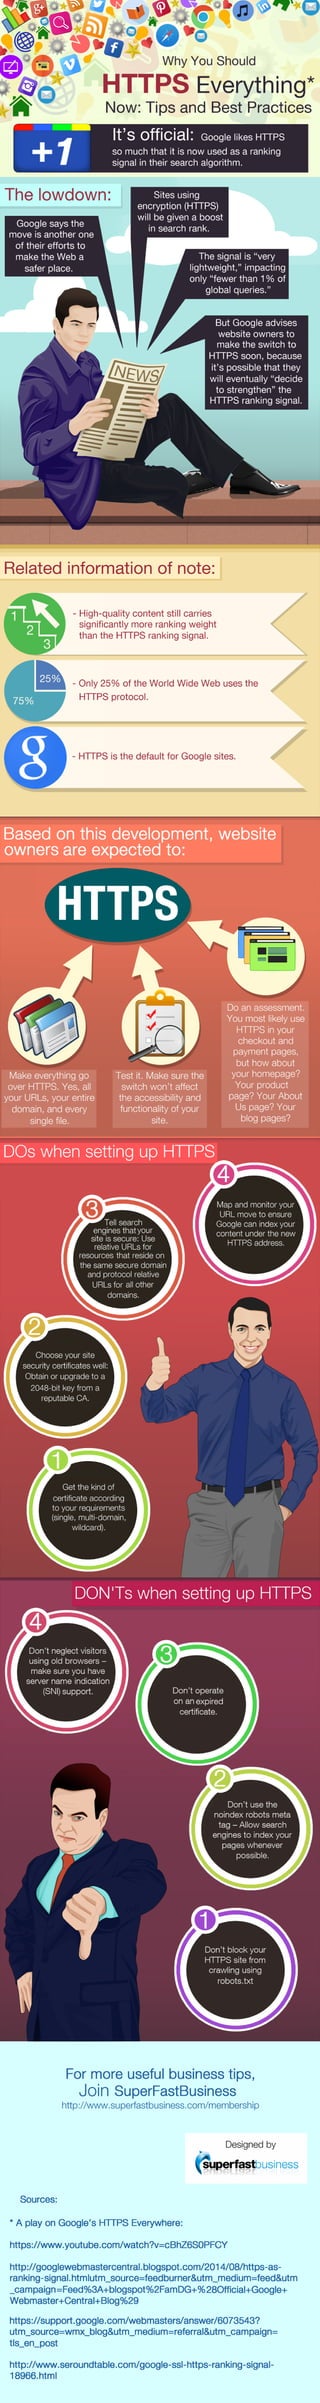 Ranking Better With HTTPS